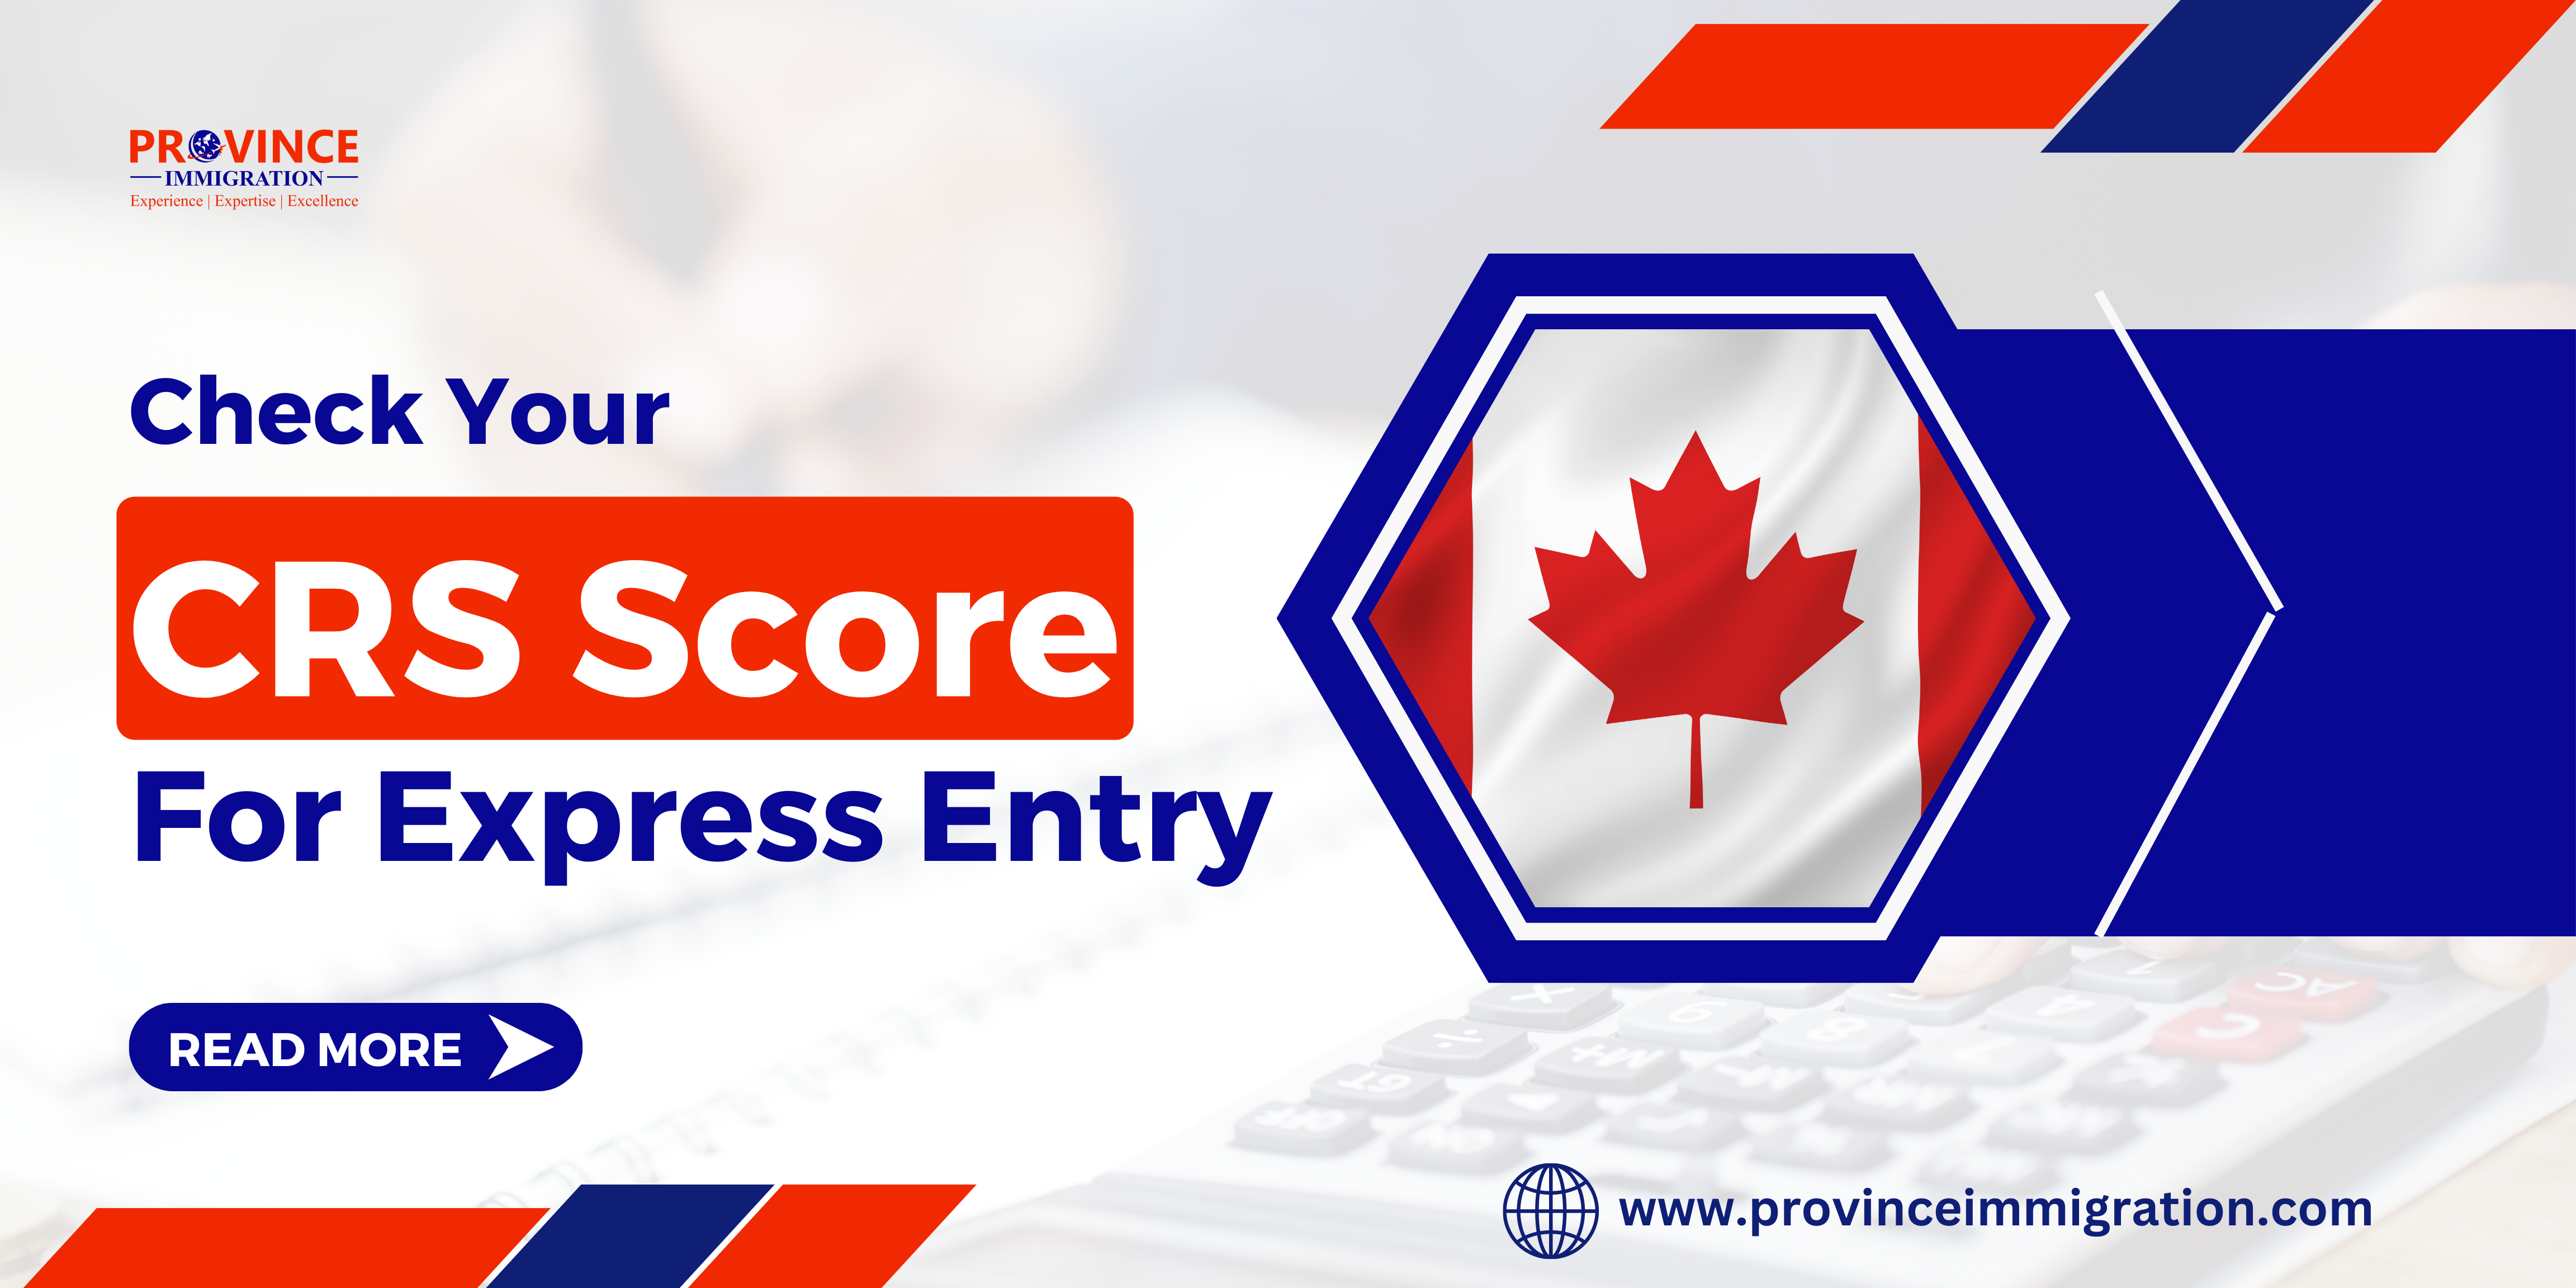 Check Your CRS Score For Express Entry